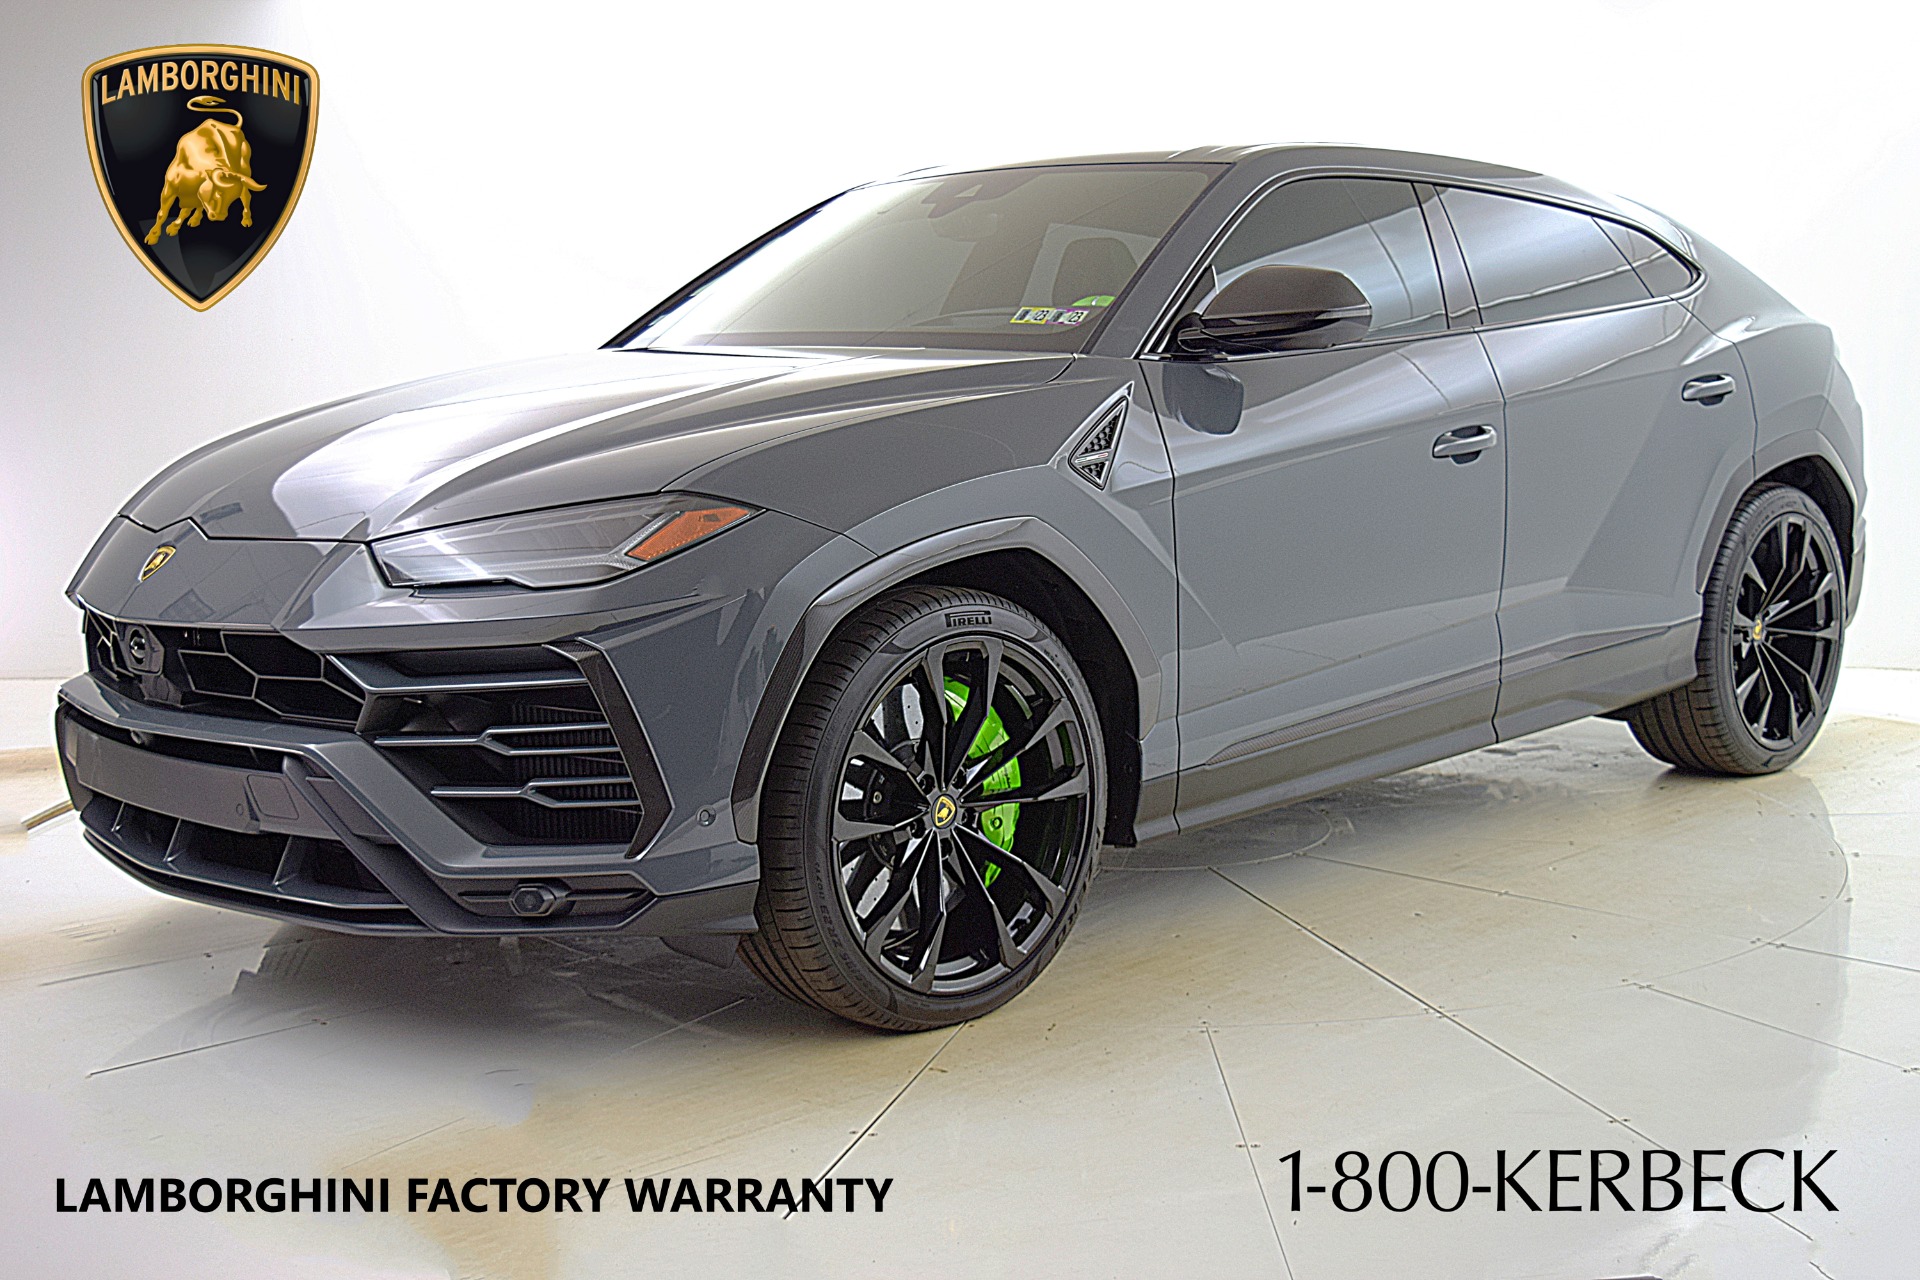 Used 2022 Lamborghini Urus / LEASE OPTIONS AVAILABLE for sale $339,000 at Bentley Palmyra N.J. in Palmyra NJ 08065 2